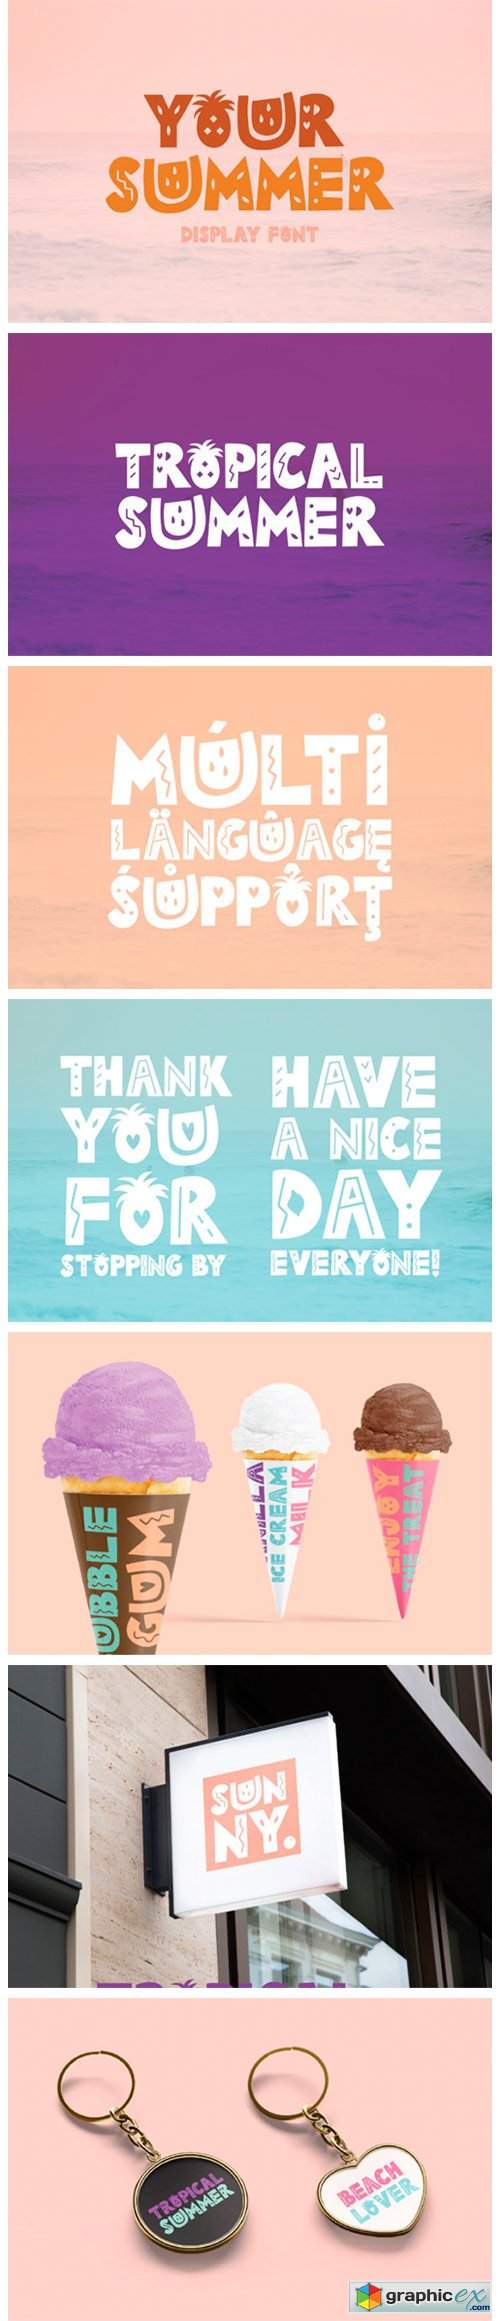  Your Summer Font 